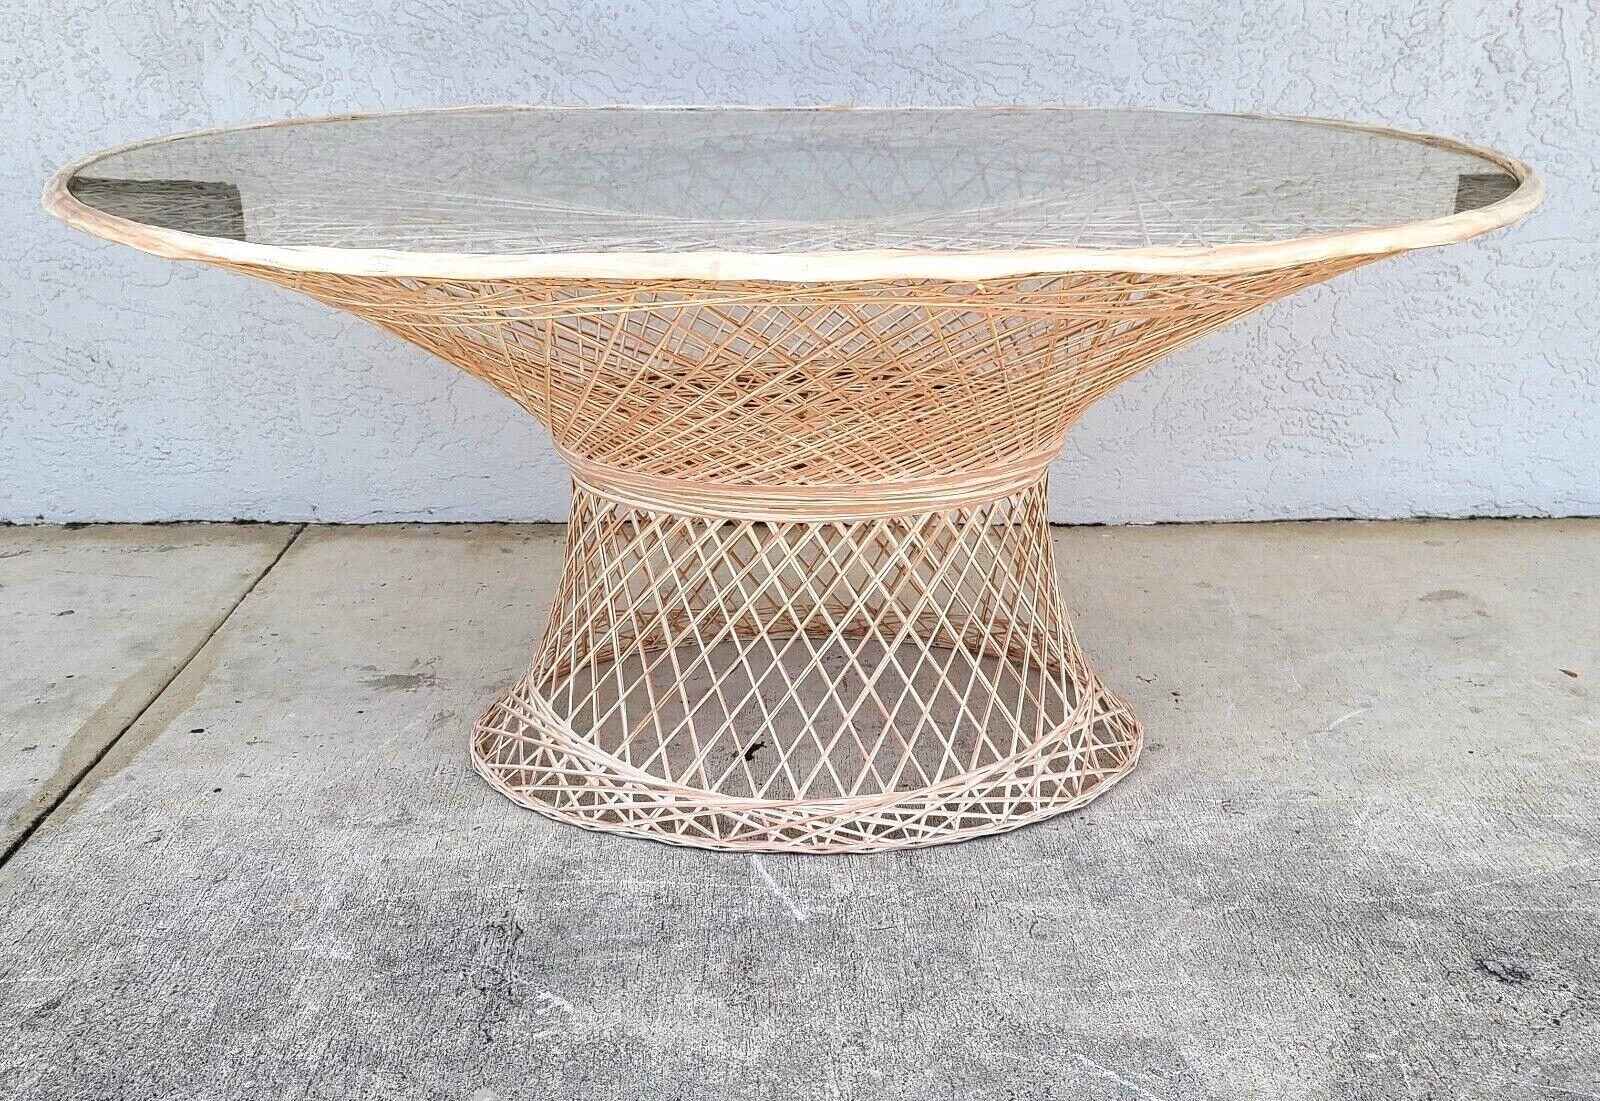 1970s MCM Russell Woodard Spun Fiberglass Outdoor Dining Set In Good Condition For Sale In Lake Worth, FL